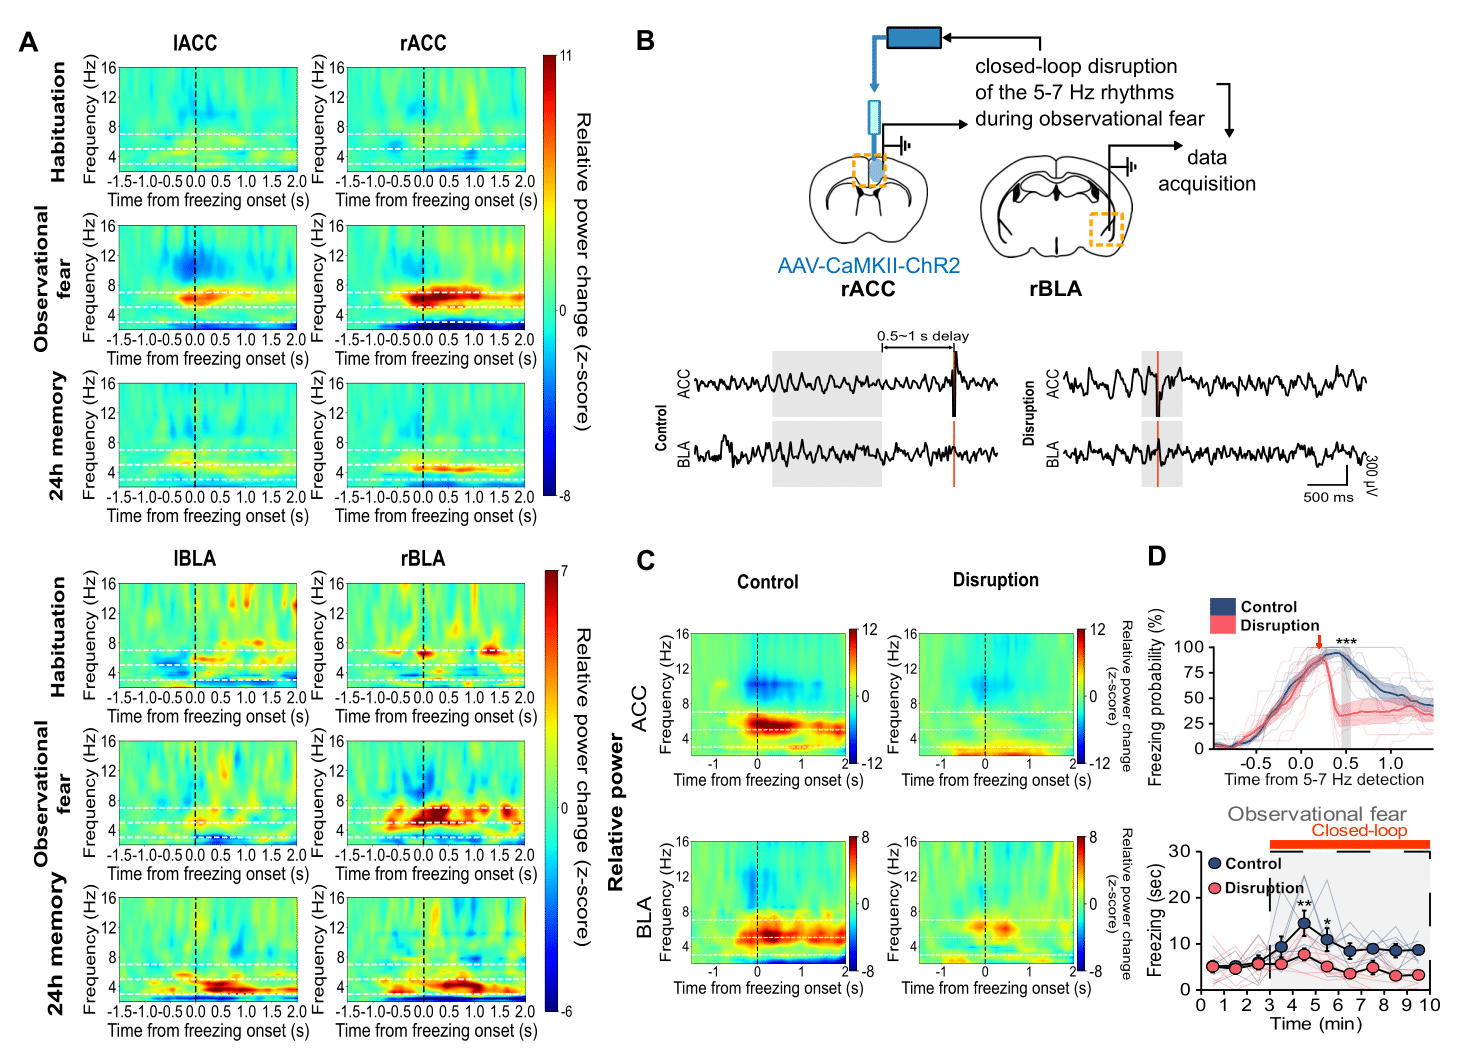 Figure 2. 5-7 Hz rhythms in rACC and rBLA are causally involved in the empathic response.
            A.5-7 Hz rhythms are selectively increased during observational fear in the rACC and rBLA.
            B.Schematic illustrations for closed-loop manipulation experiment.
            C.Closed-loop manipulation disrupted 5-7 Hz rhythms in the rACC and rBLA.
            D.Closed-loop manipulation disrupted freezing behavior during observational fear.
            